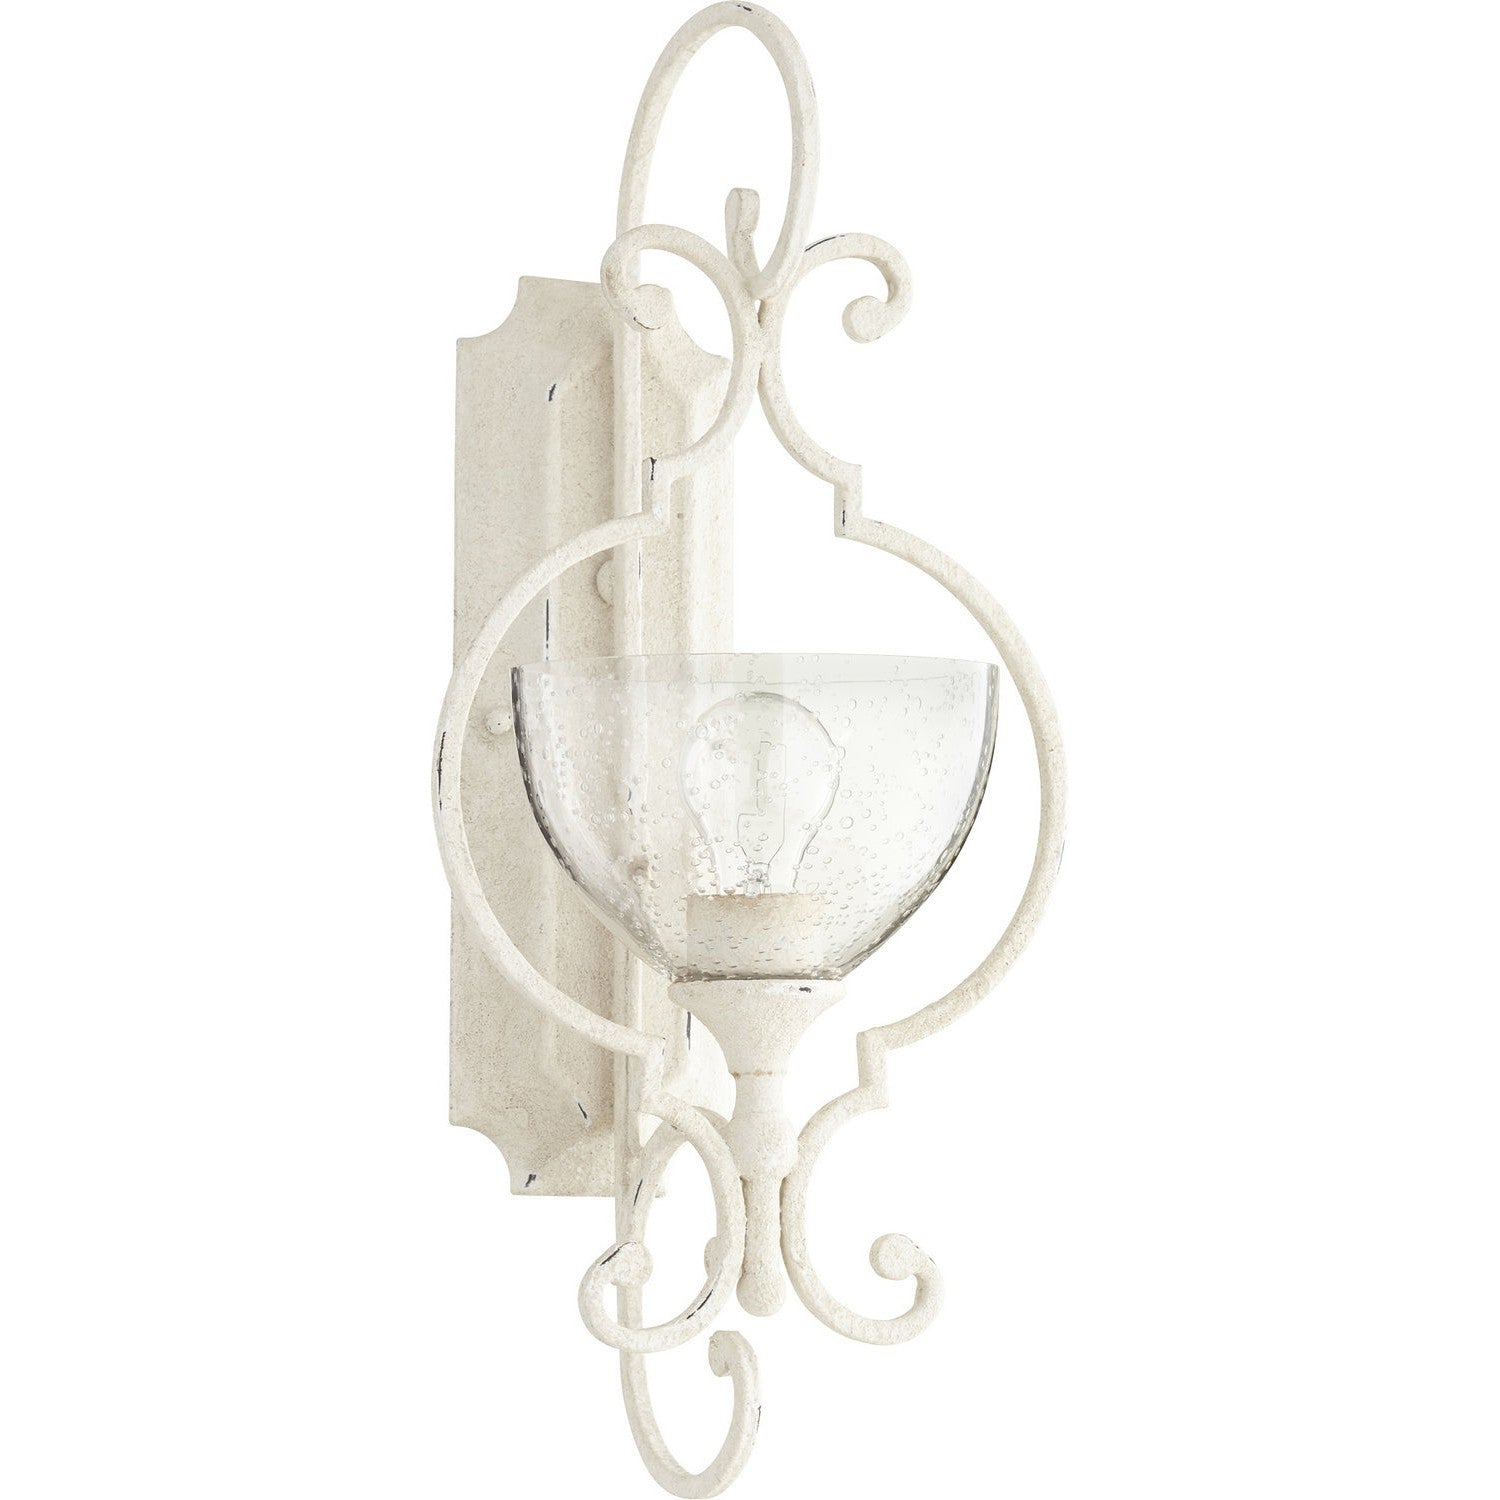 Quorum Ansley 5414-1-70 Wall Sconce Light - Persian White